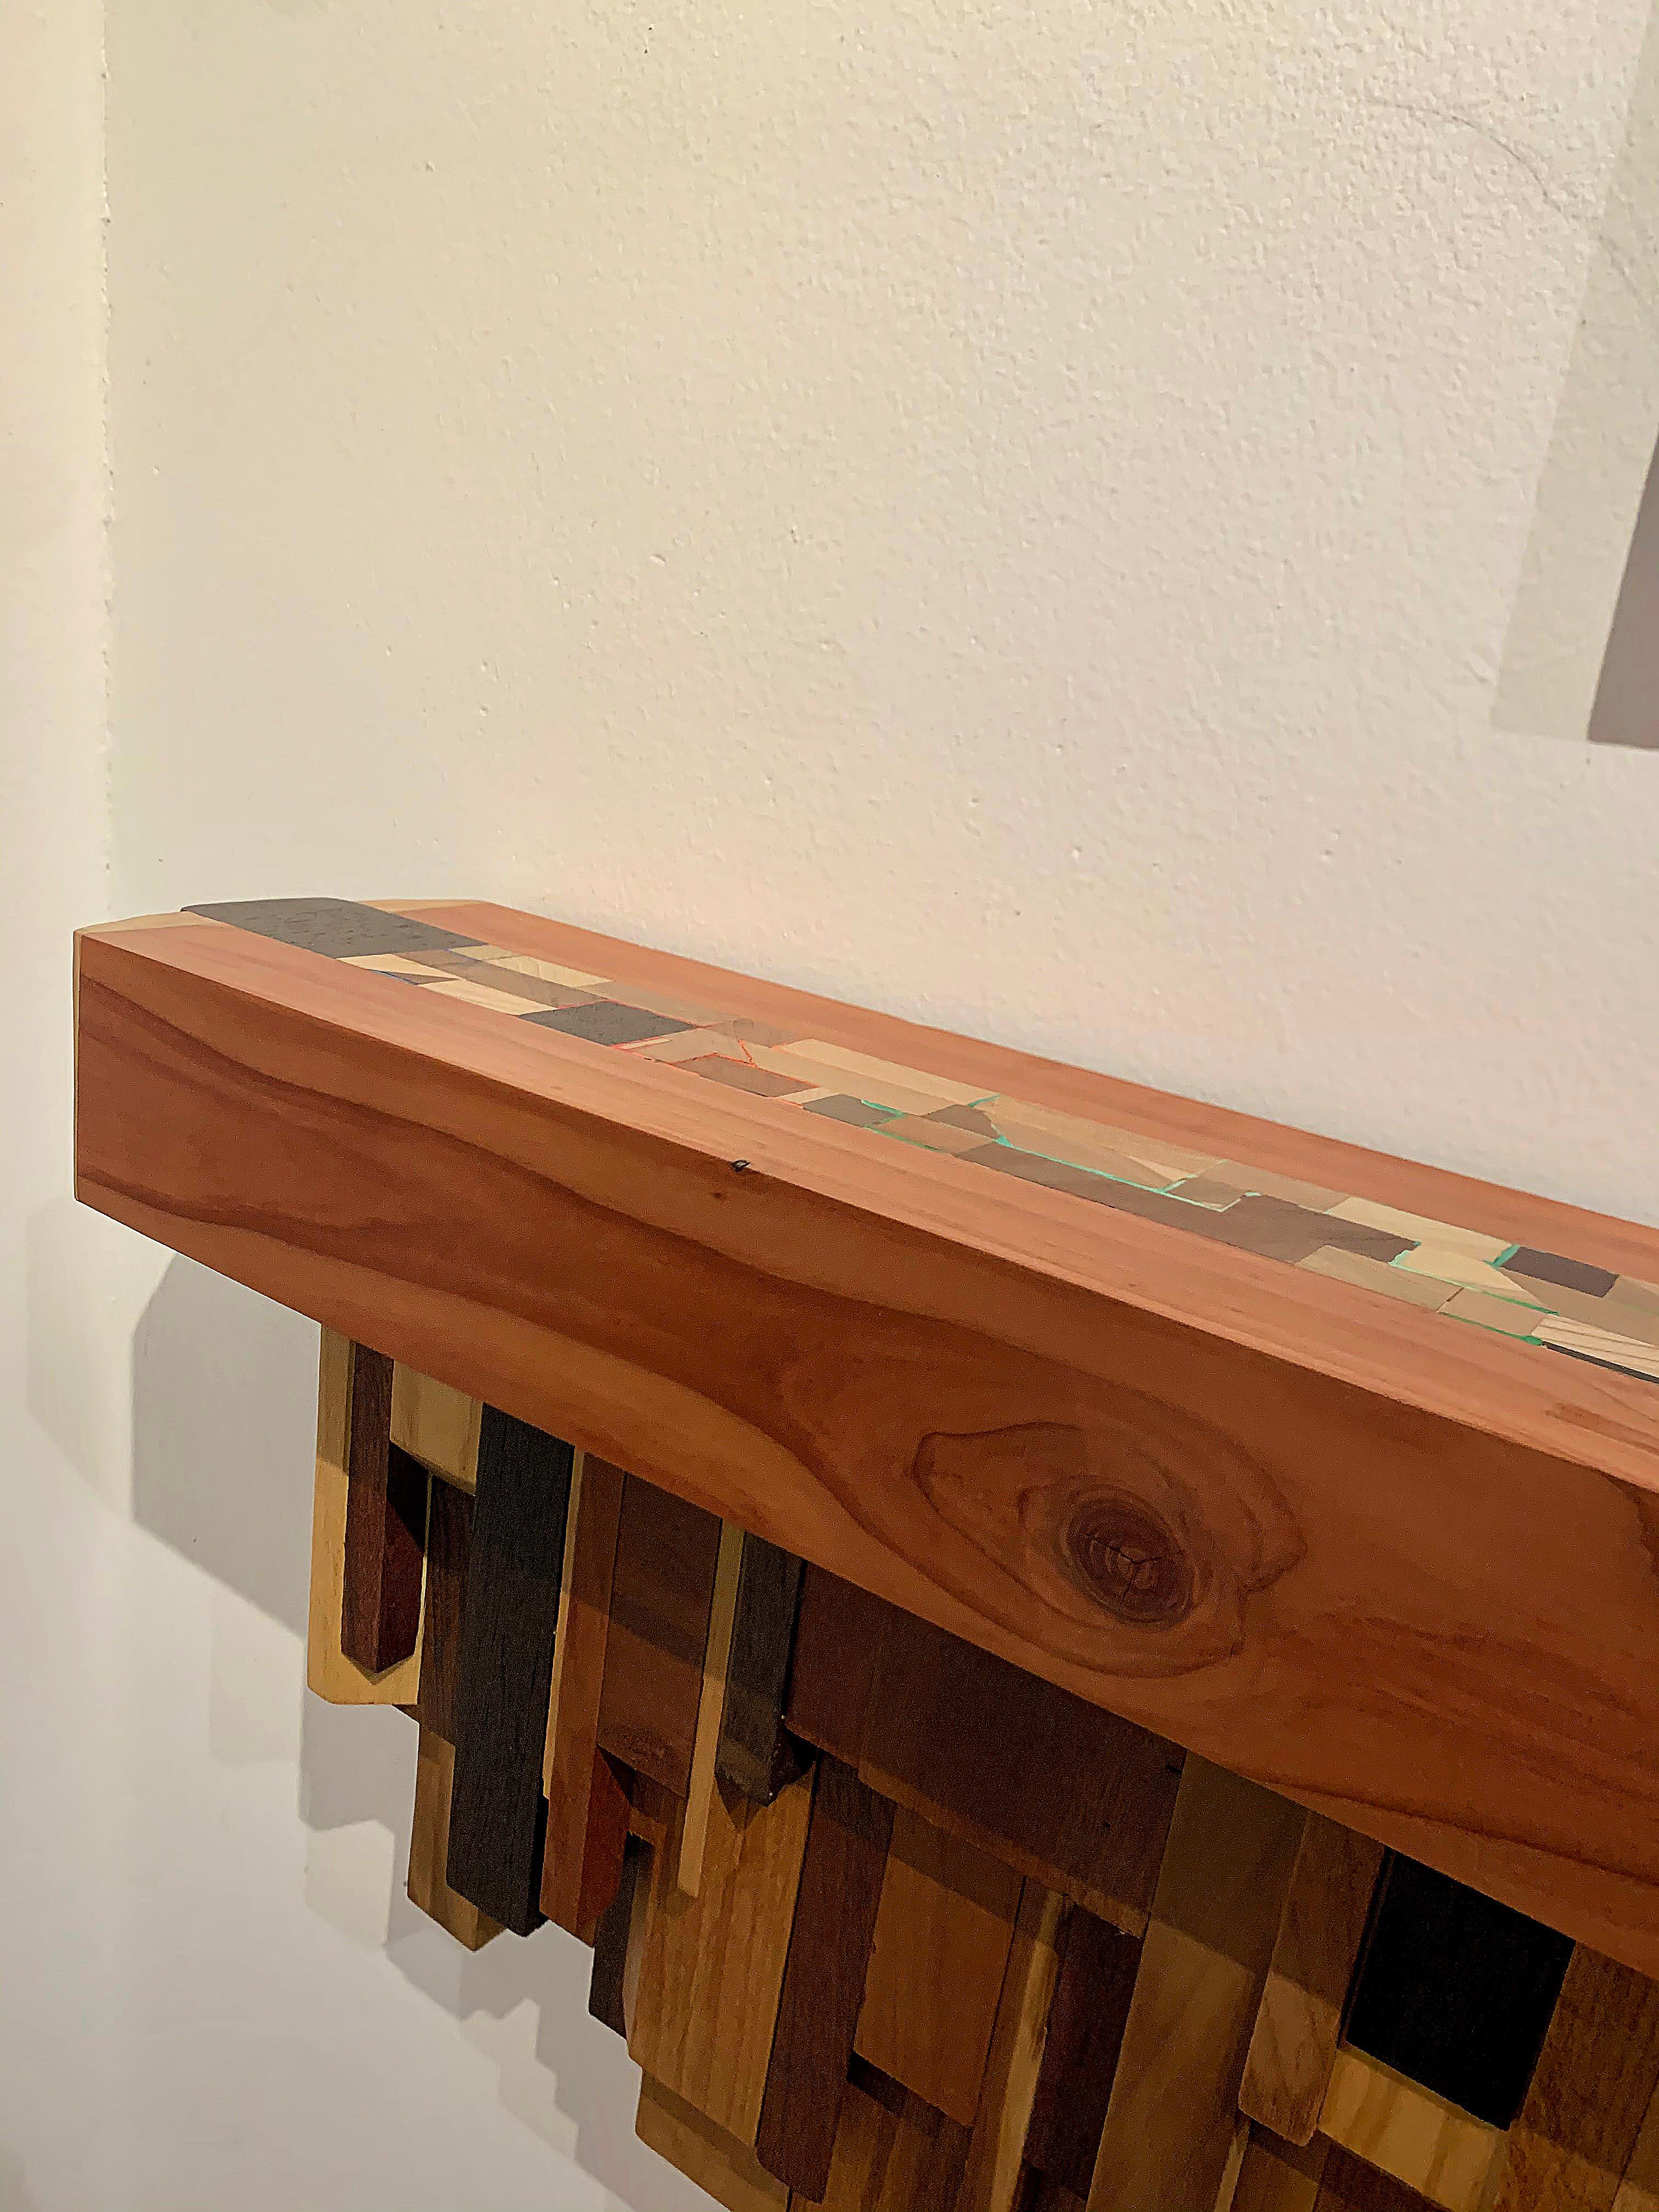 Artful one-of-a-kind long shelf or sculpture by artist Ben Darby. Made of various pieces of wood and accented with multi-color acrylic paint. We selected this piece soon after it was completed and as with many of Darby's artwork, this piece is a